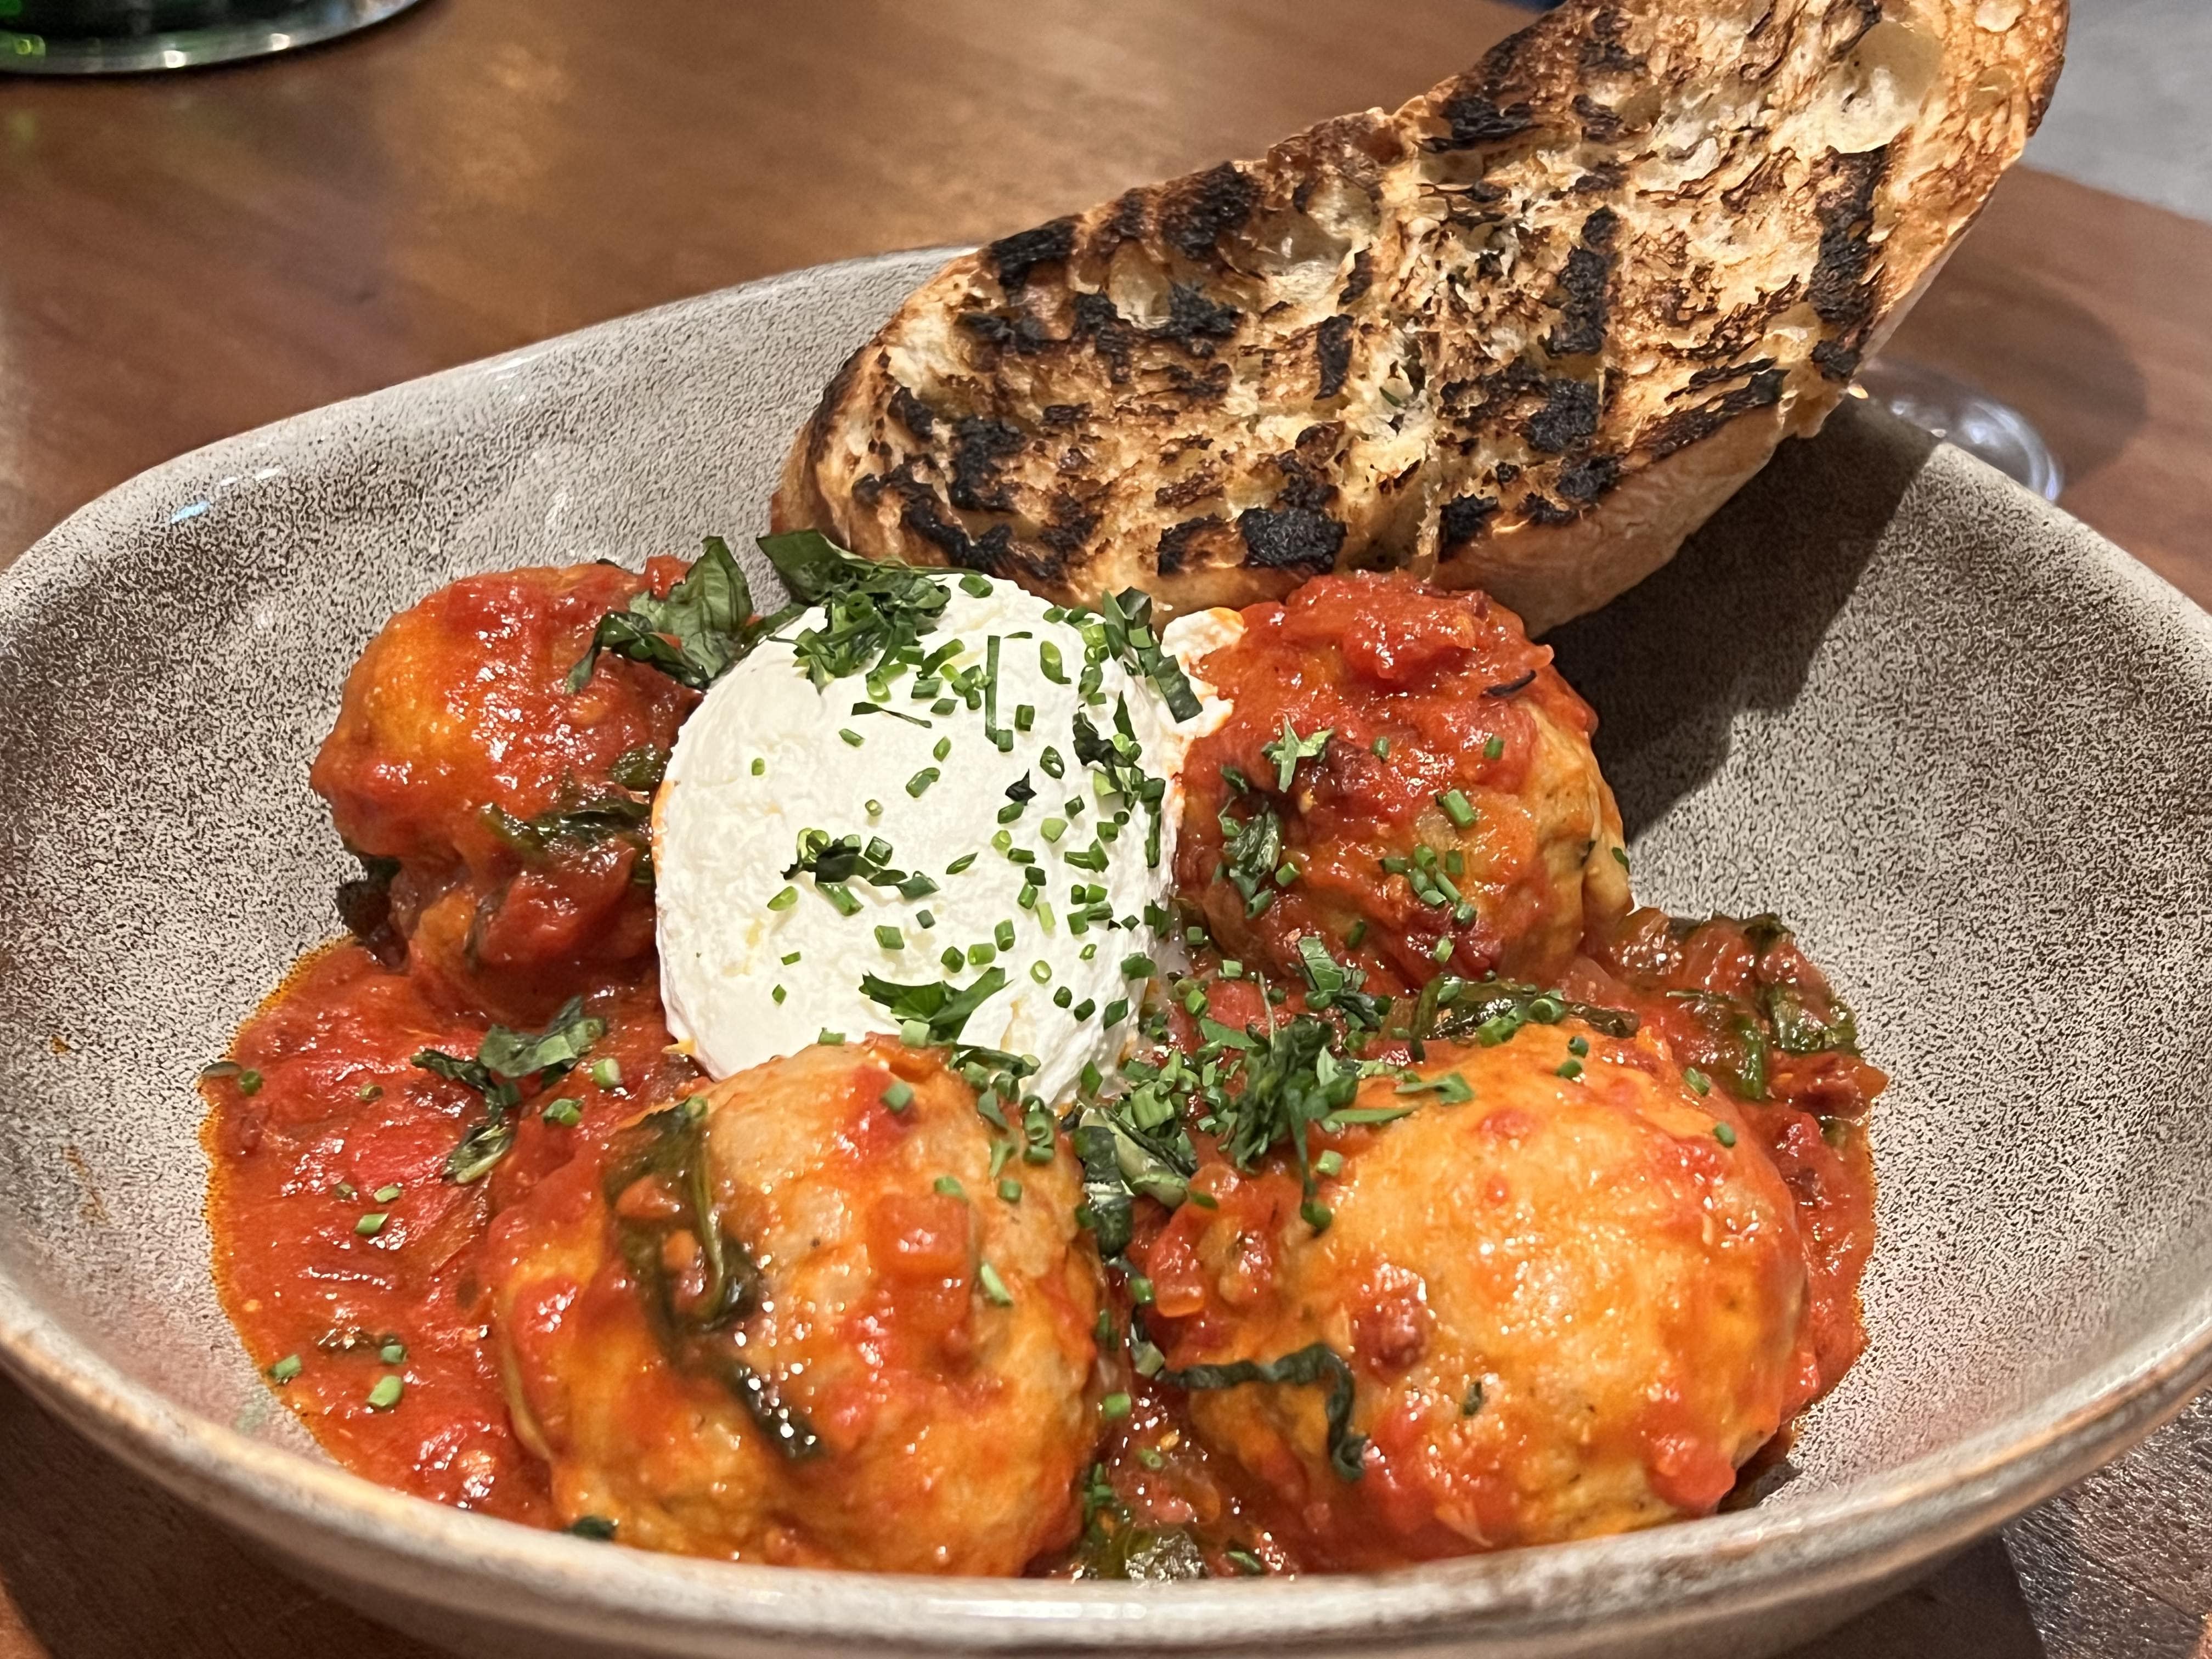 Kurobuta Pork Meatballs with house ricotta served for lunch at Anima By EDO